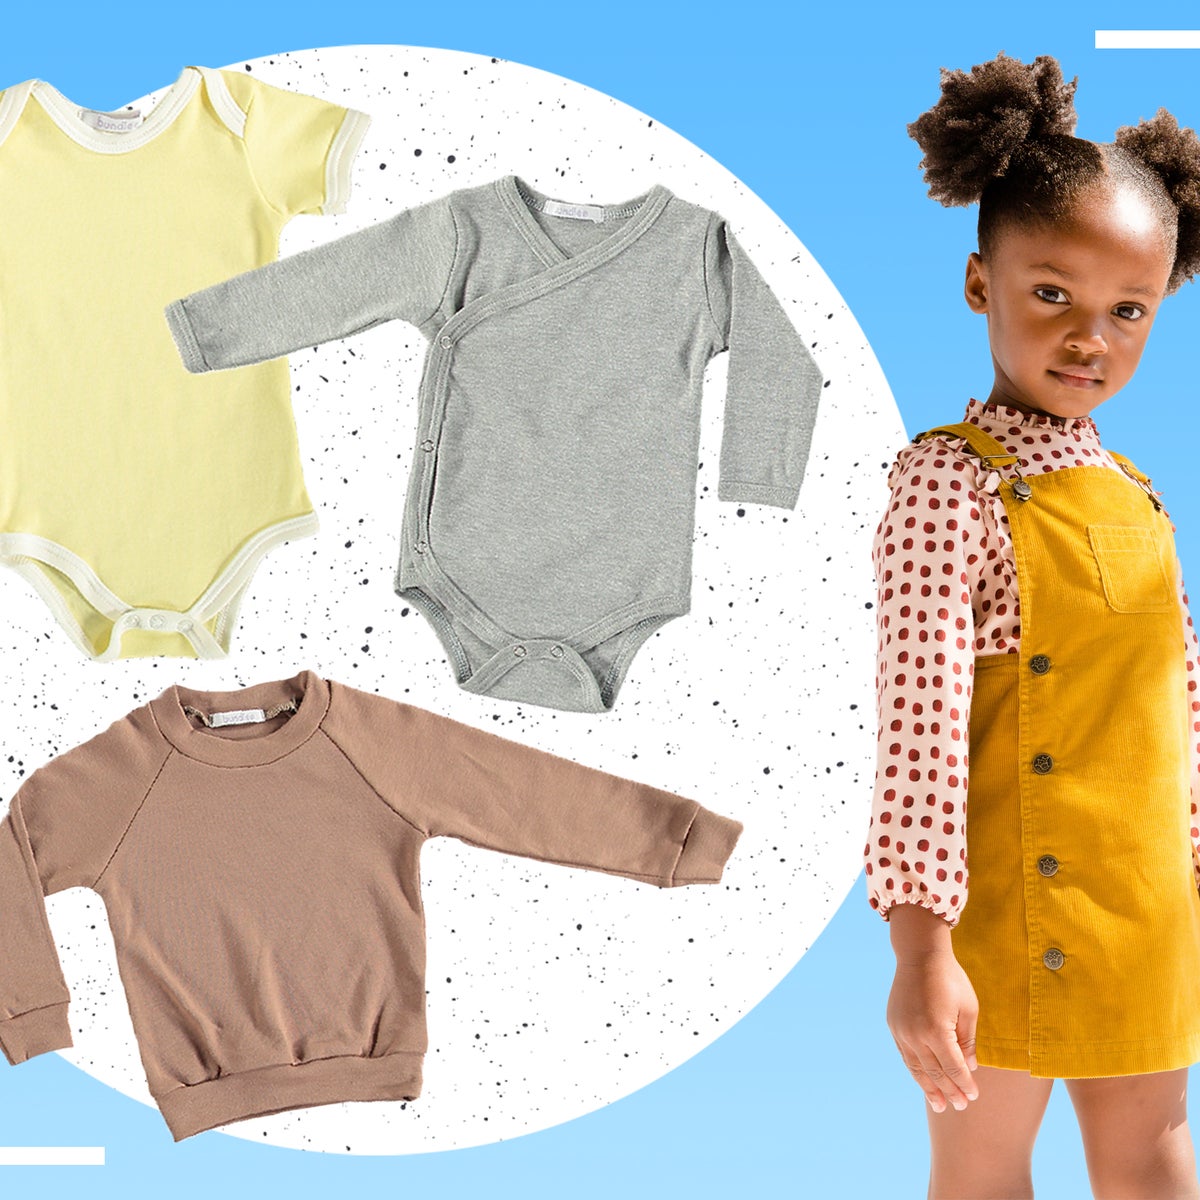 Best kids' clothes rental services: Save cash, space and waste